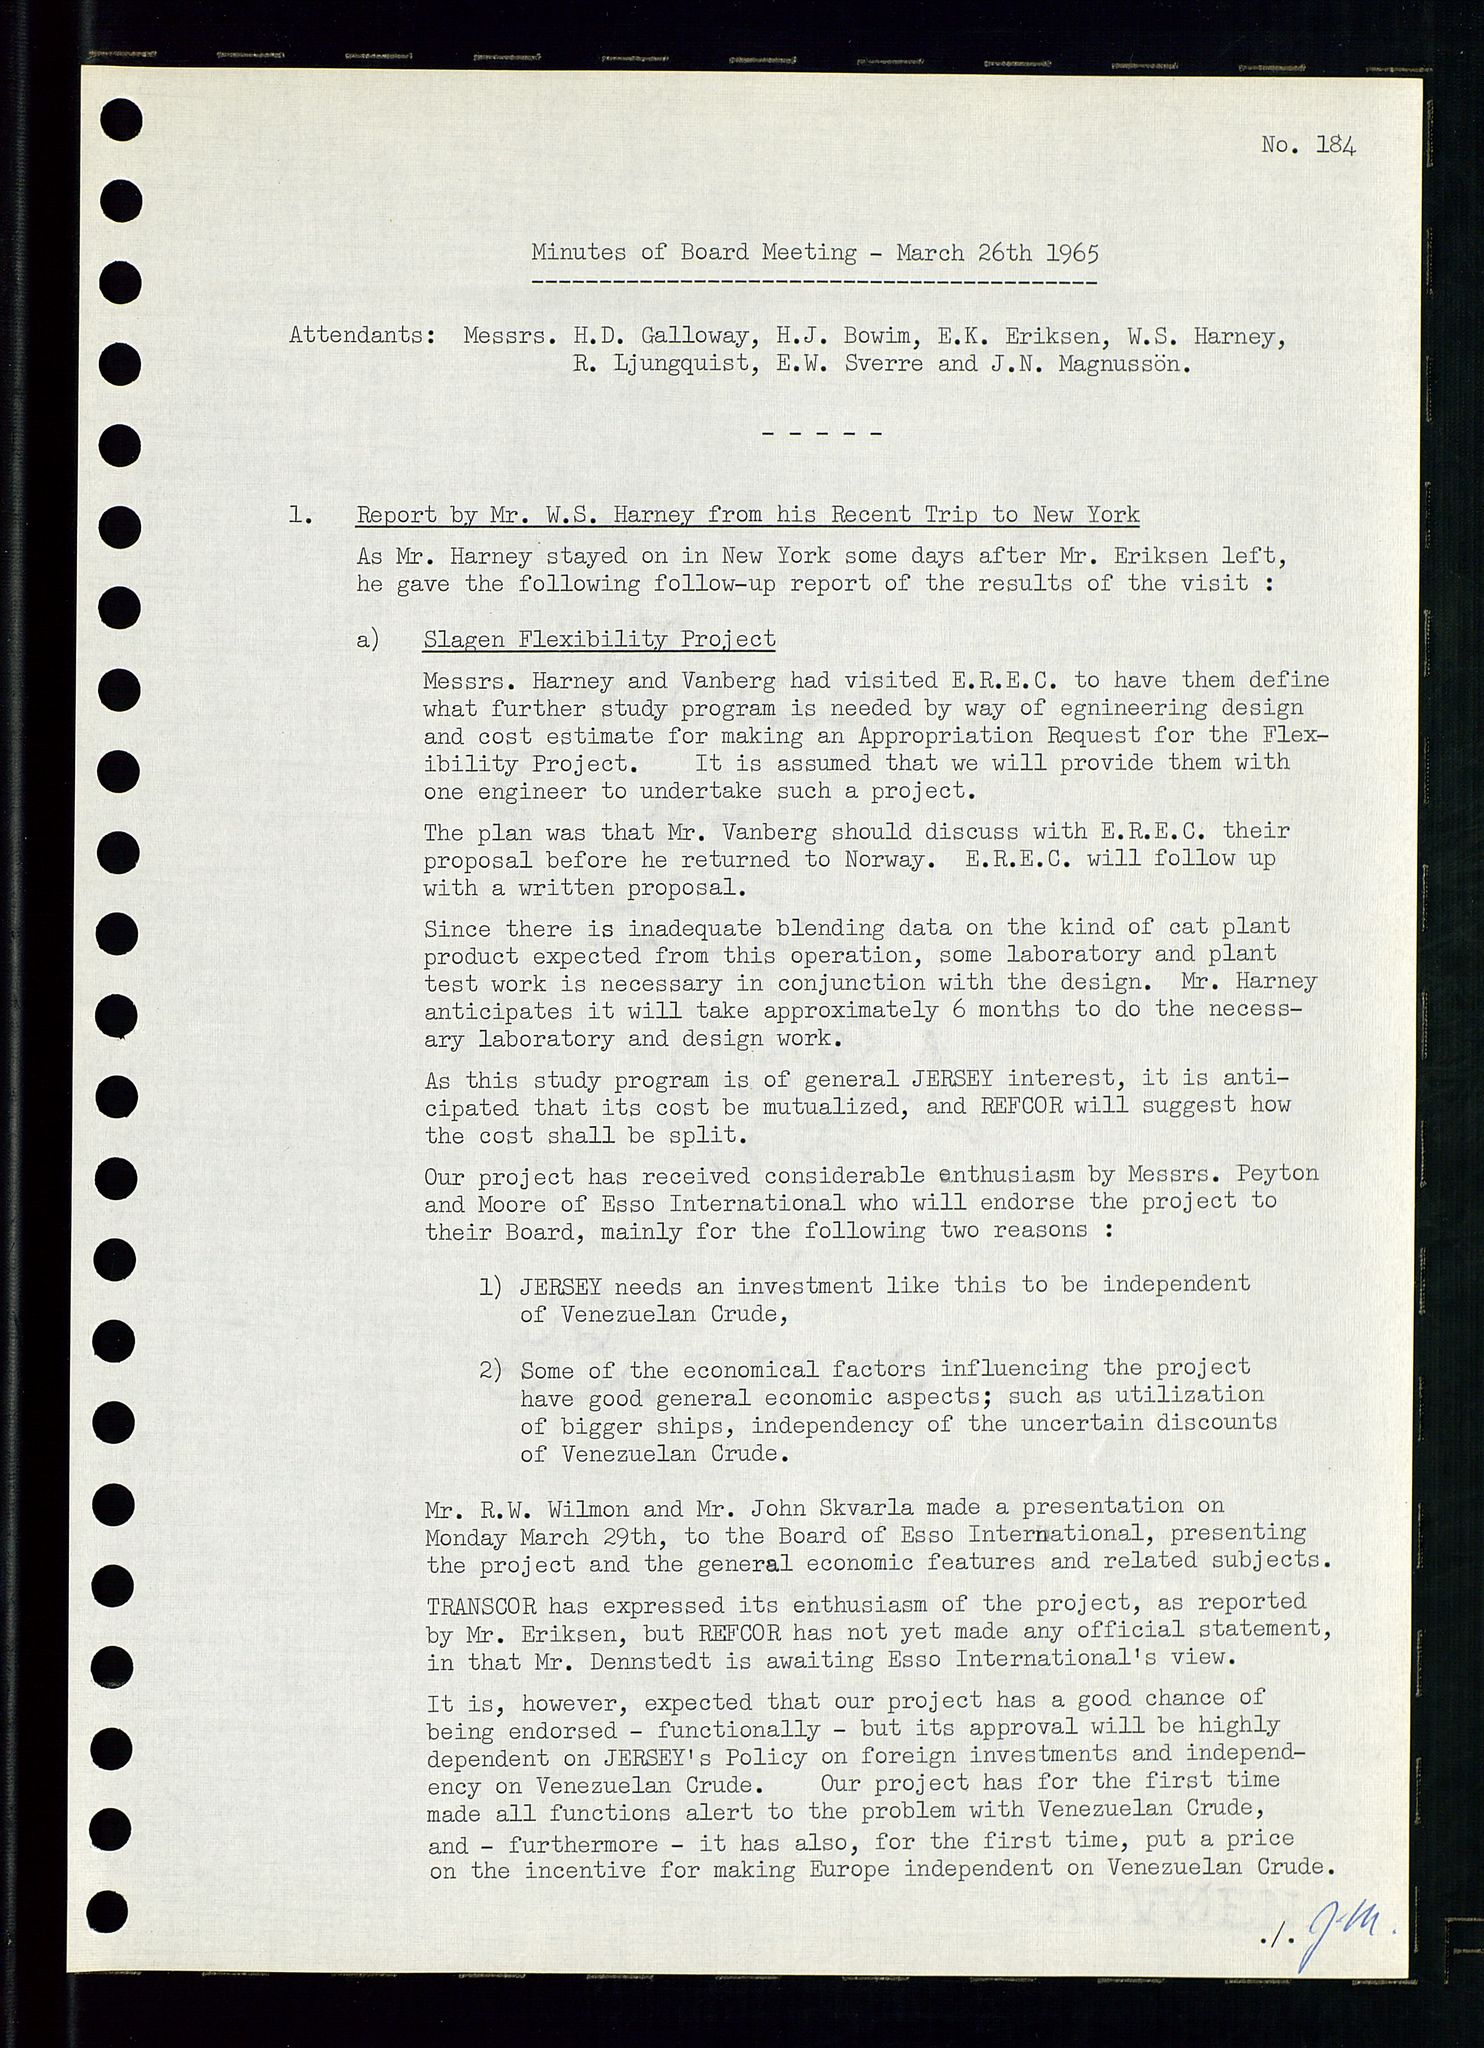 Pa 0982 - Esso Norge A/S, SAST/A-100448/A/Aa/L0002/0001: Den administrerende direksjon Board minutes (styrereferater) / Den administrerende direksjon Board minutes (styrereferater), 1965, s. 132